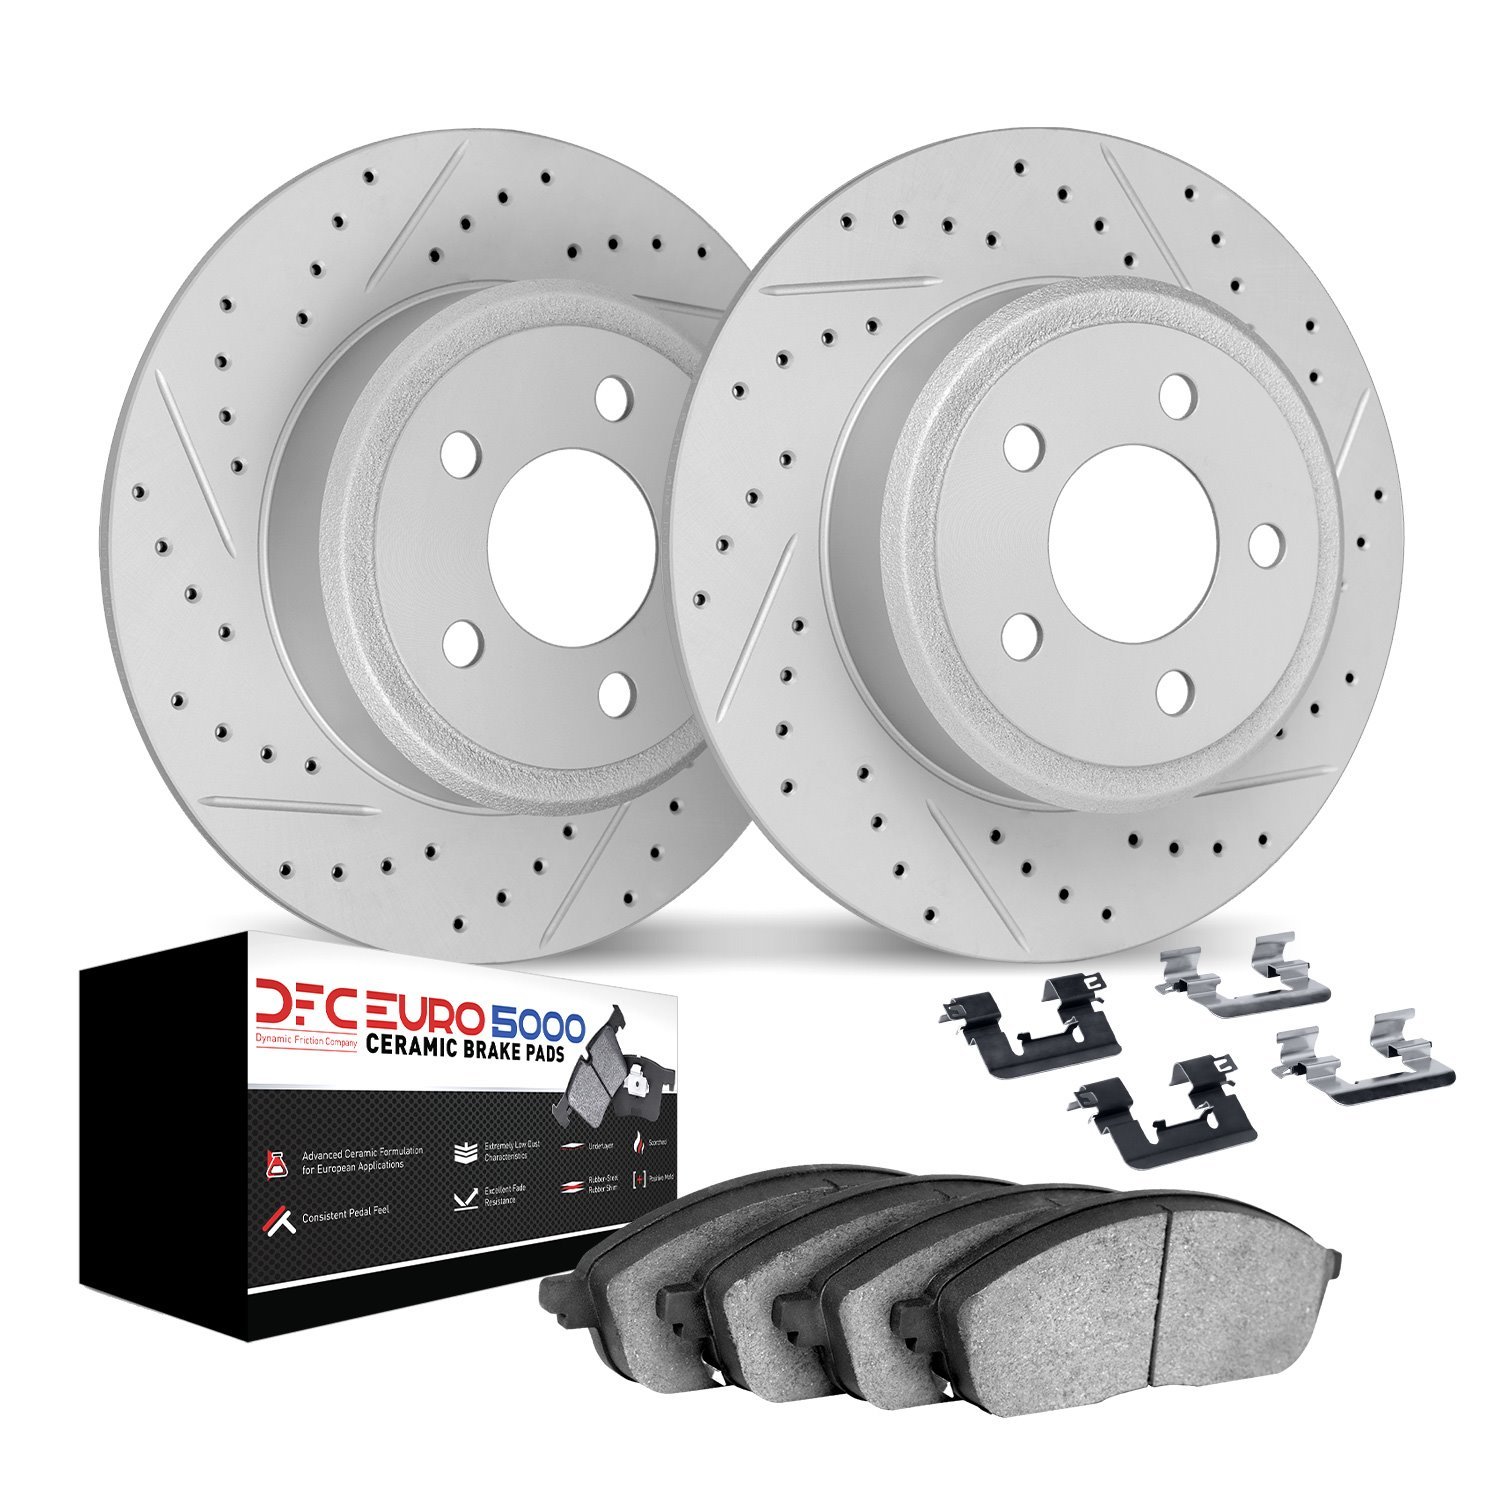 2612-02001 Geoperformance Drilled/Slotted Rotors w/5000 Euro Ceramic Brake Pads Kit & Hardware, 1965-1973 Porsche, Position: Fro